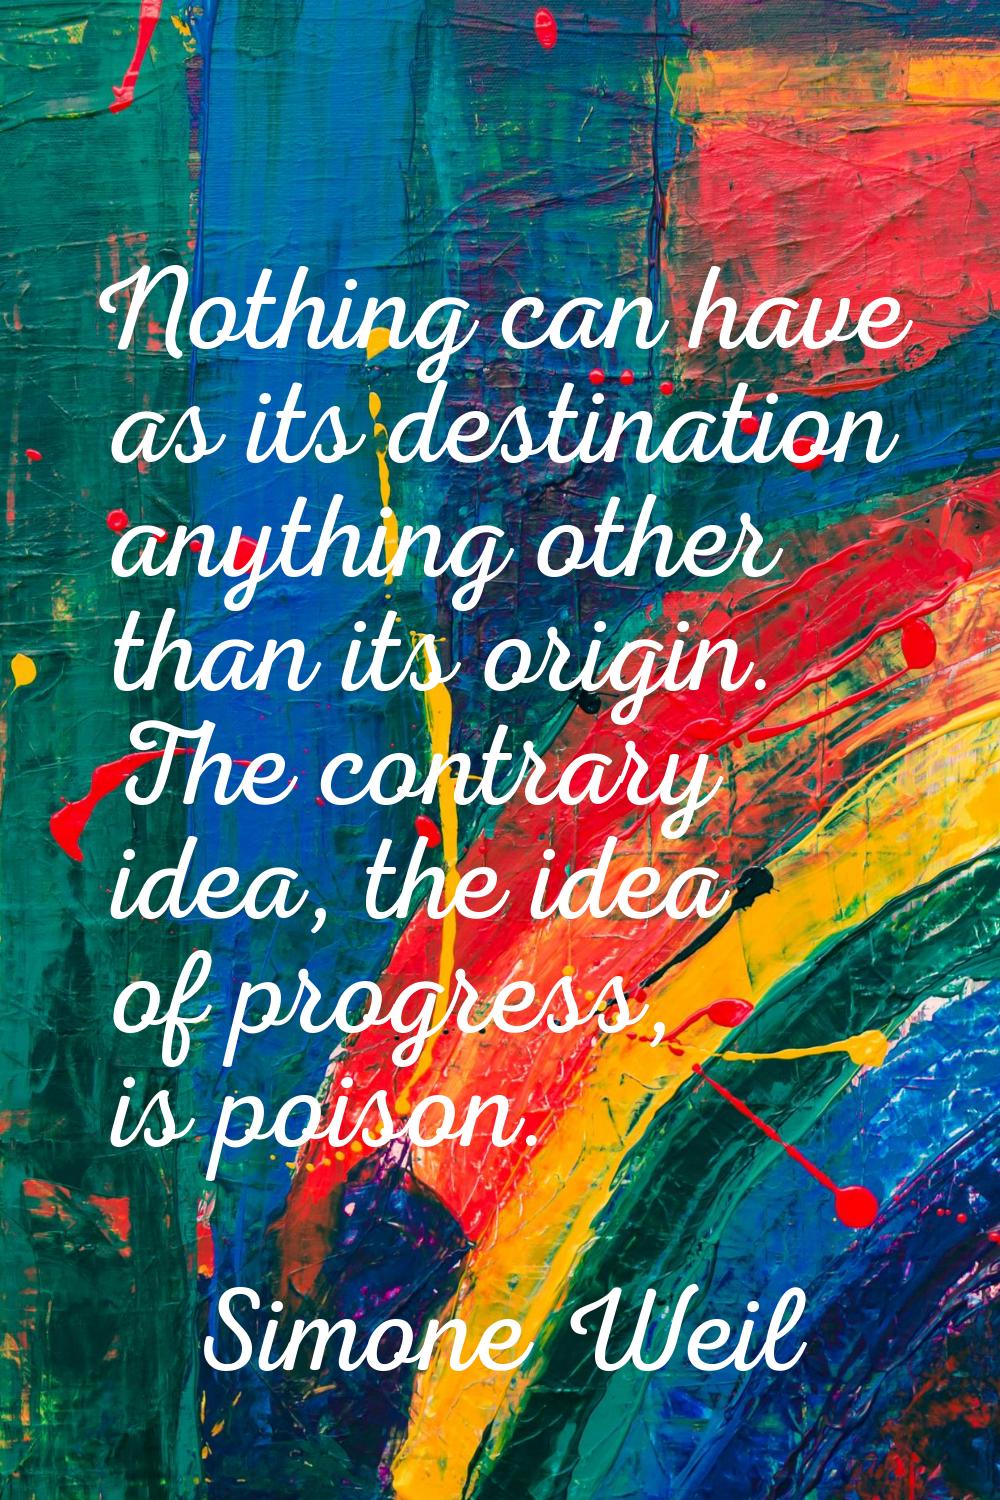 Nothing can have as its destination anything other than its origin. The contrary idea, the idea of 